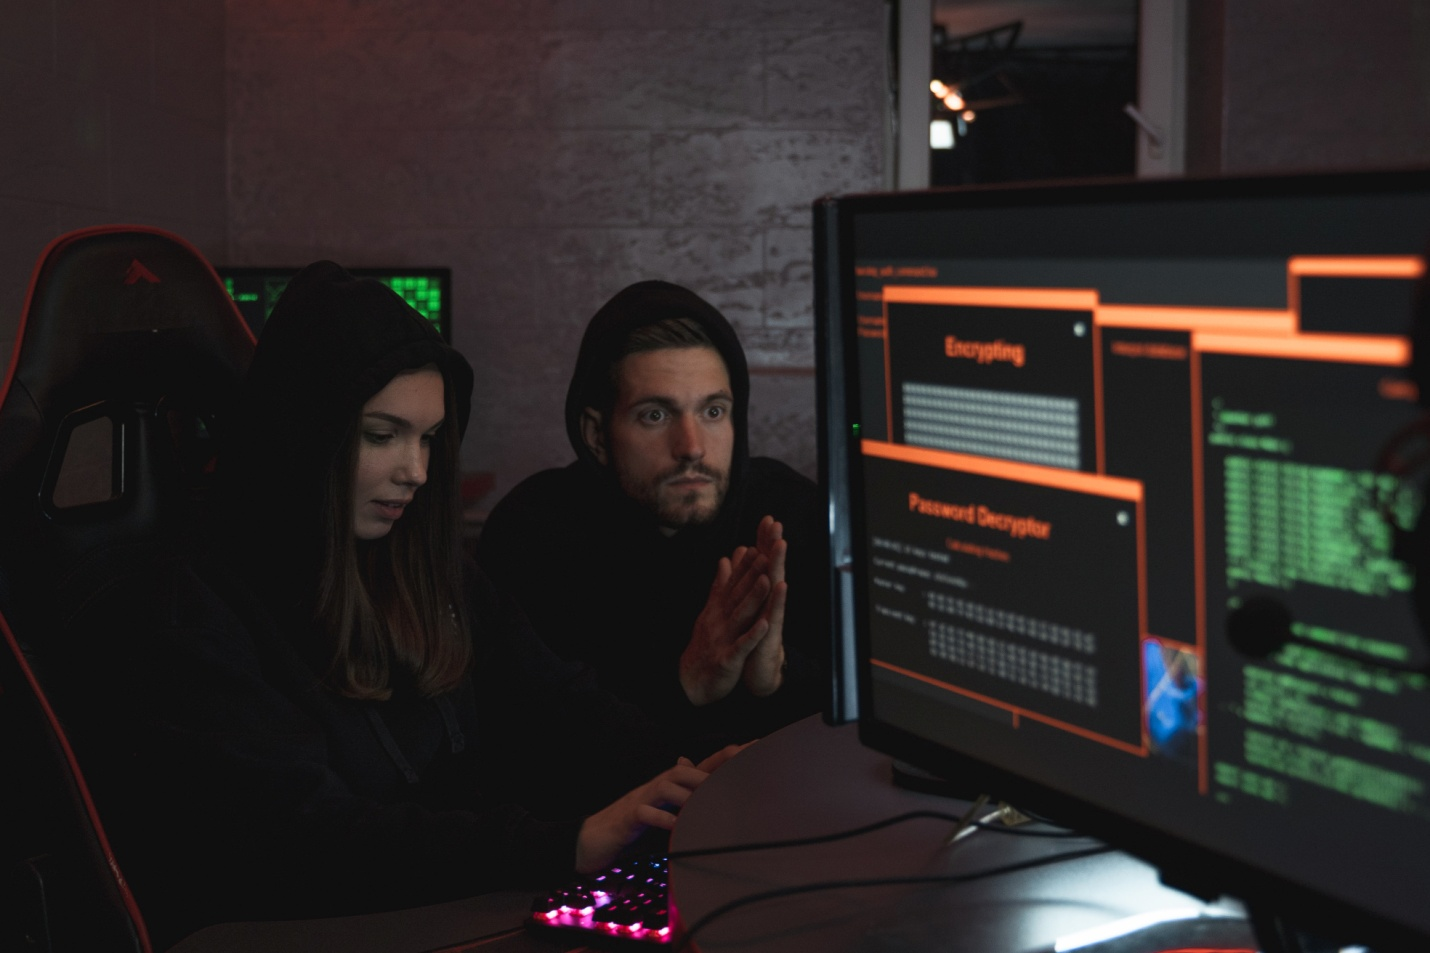 A man and a woman hacking a computer system